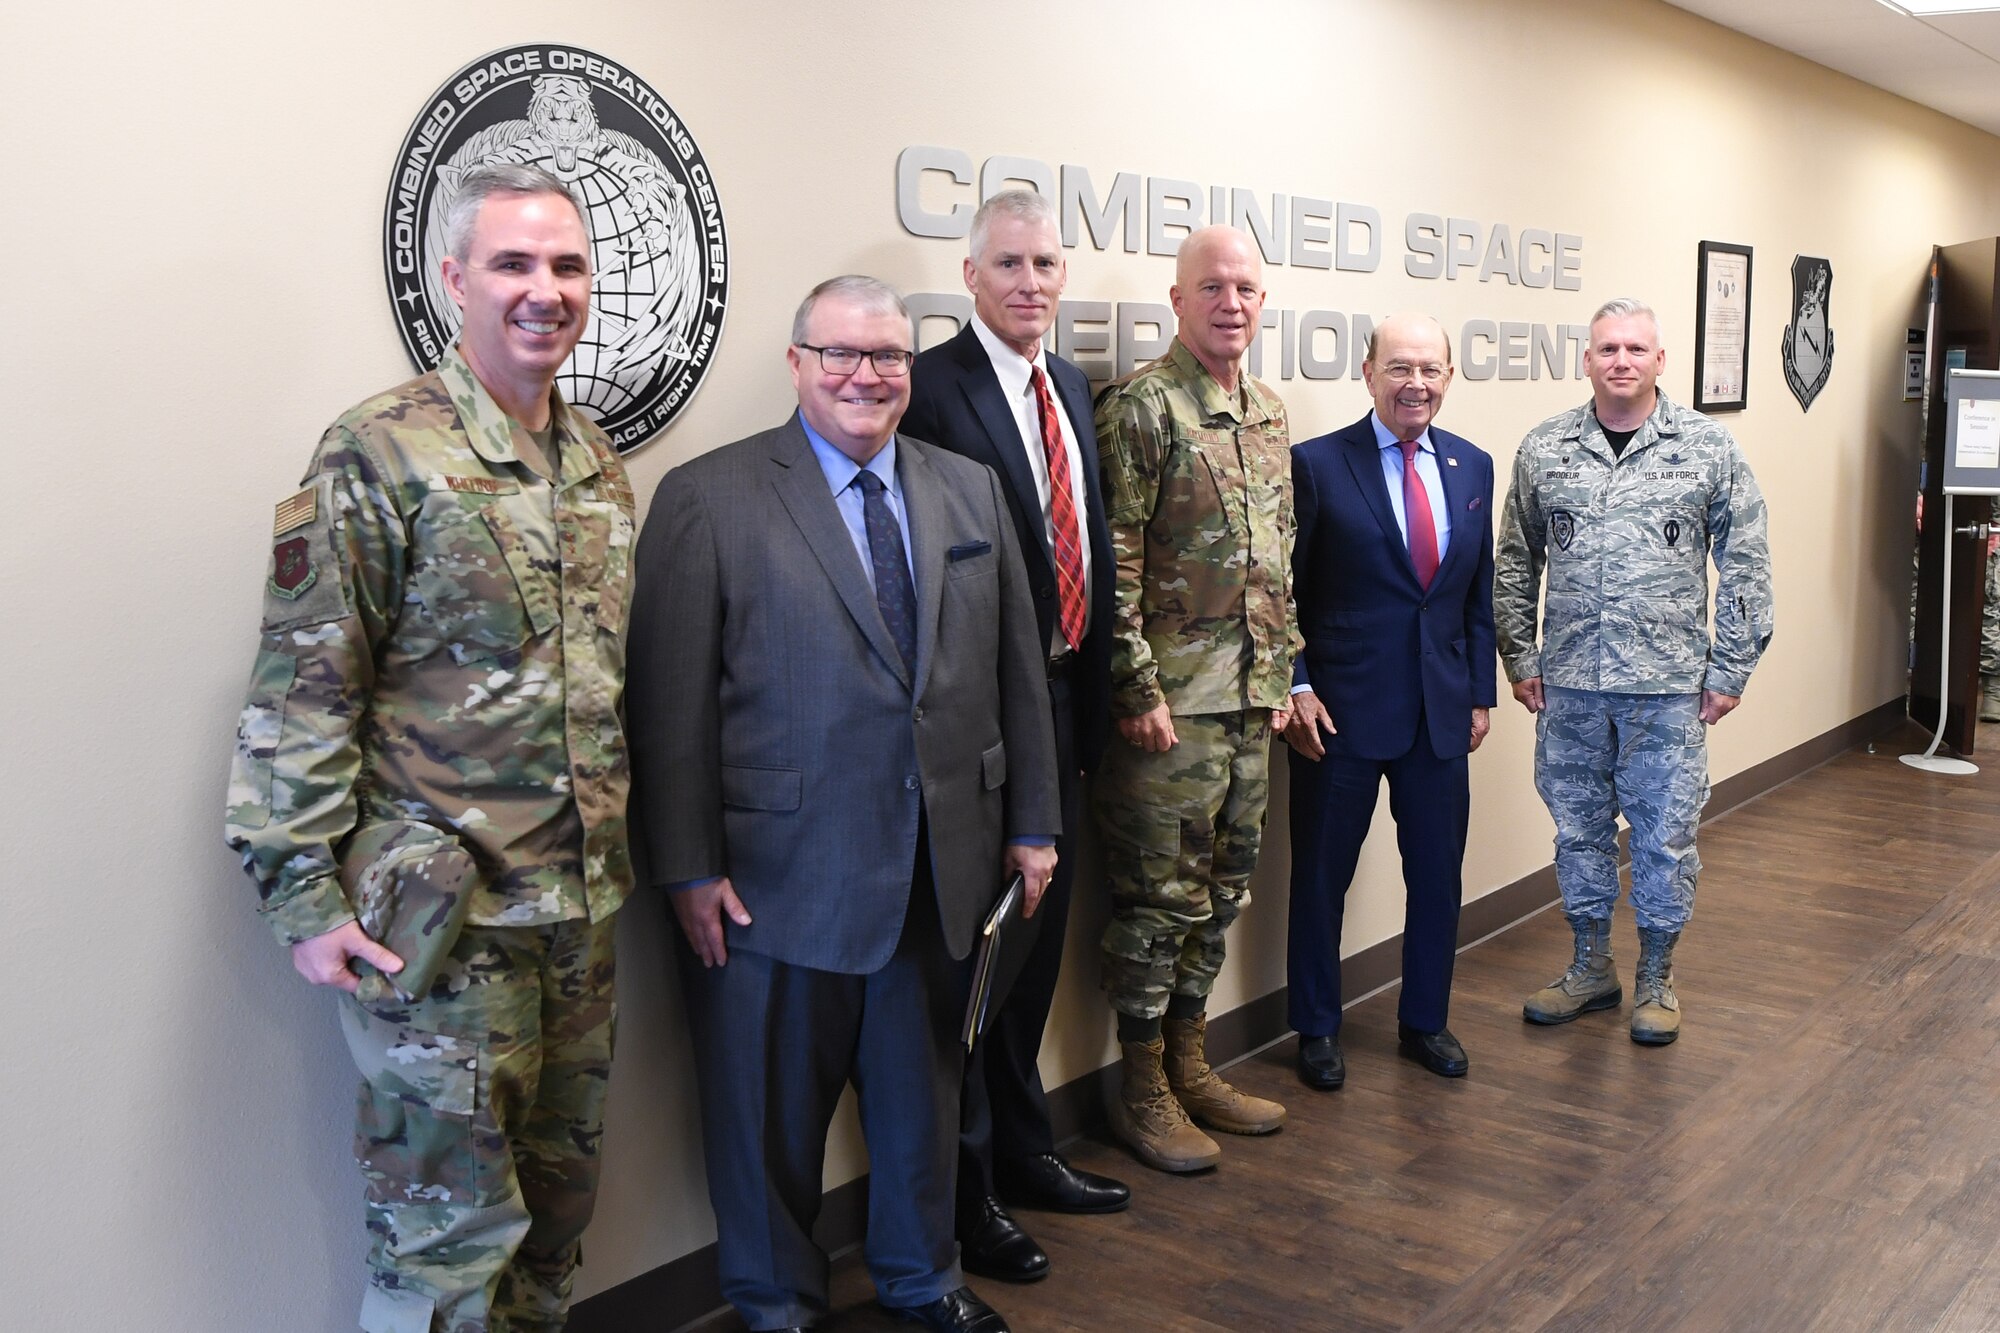 U.S. Secretary of Commerce Wilbur Ross (second from right) poses for a photo with Department of Commerce and Joint Force Space Component Command leaders in the Combined Space Operations Center at Vandenberg AFB, Calif., Nov. 30, 2018. Secretary Ross met with service members from the 18th Space Control Squadron, Combined Space Operations Center, Joint Force Space Component Command and U.S. Strategic Command to discuss Space Situational Awareness capabilities and space operations during a visit here Nov. 29-30. Secretary Ross also spoke with service members about the Department of Defense transitioning non-military aspects of Space Situational Awareness and space safety monitoring and responsibilities to the Department of Commerce. (U.S. Air Force photo by Maj. Cody Chiles)